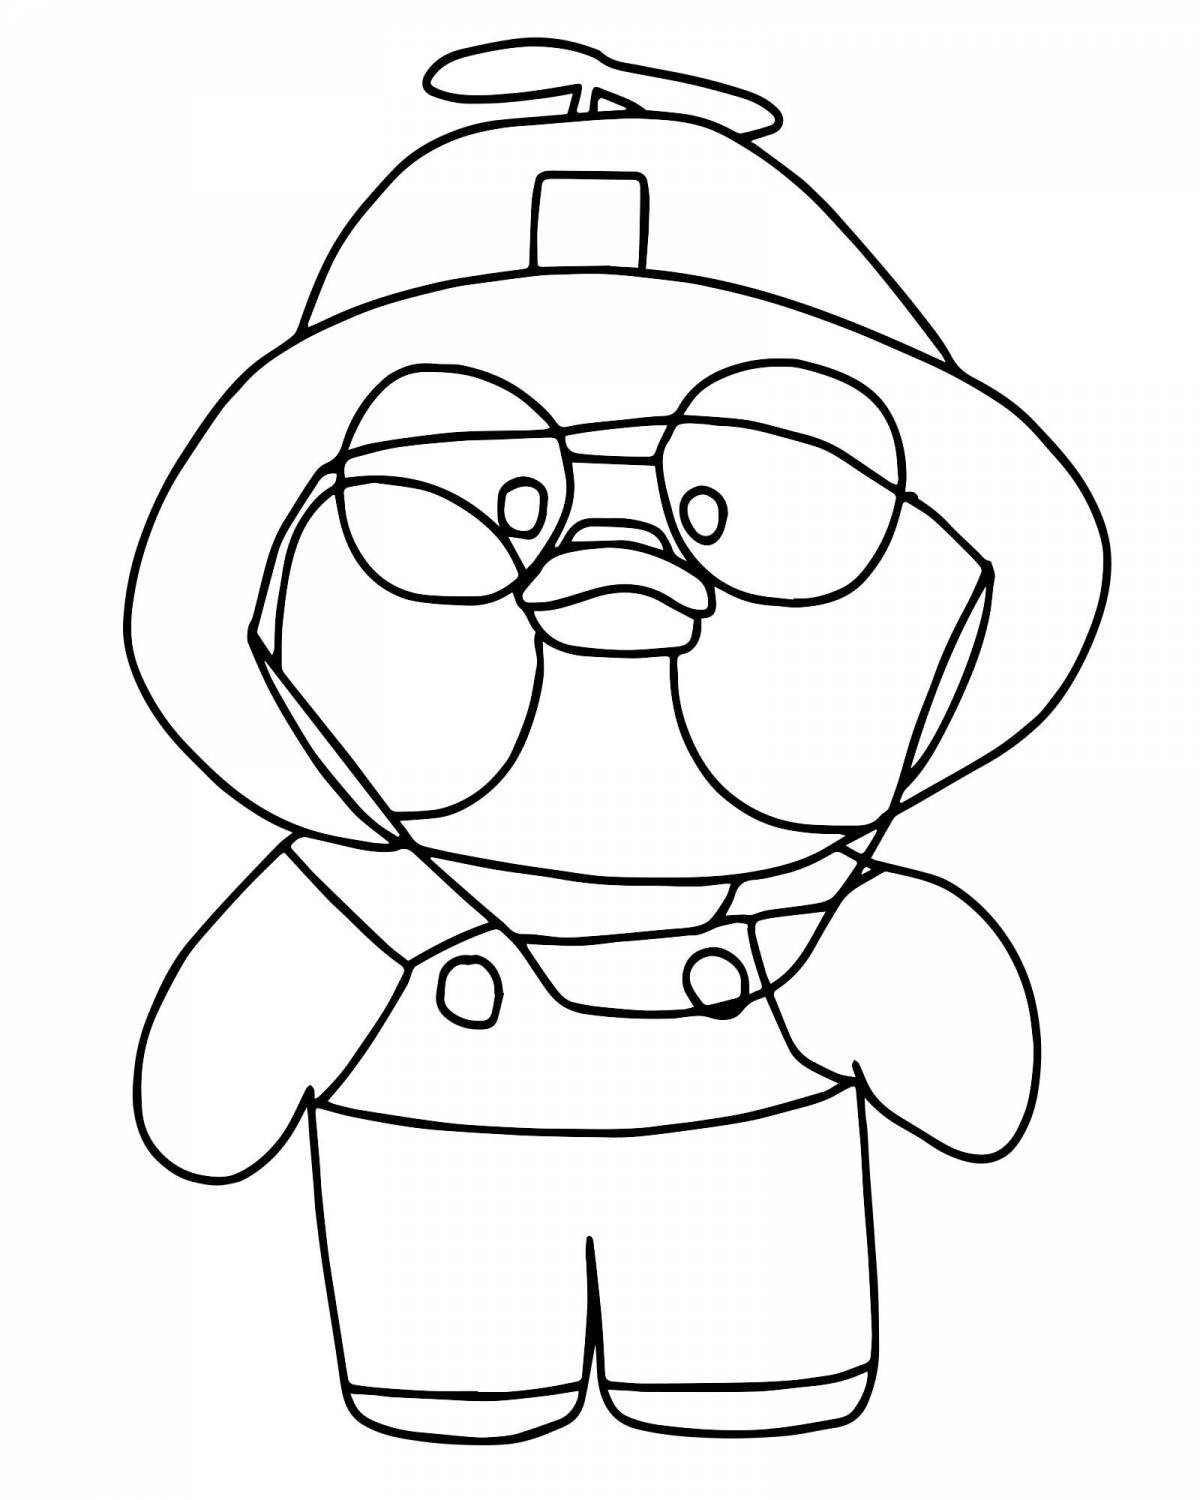 Color-fiesta duck lalafanfan coloring page